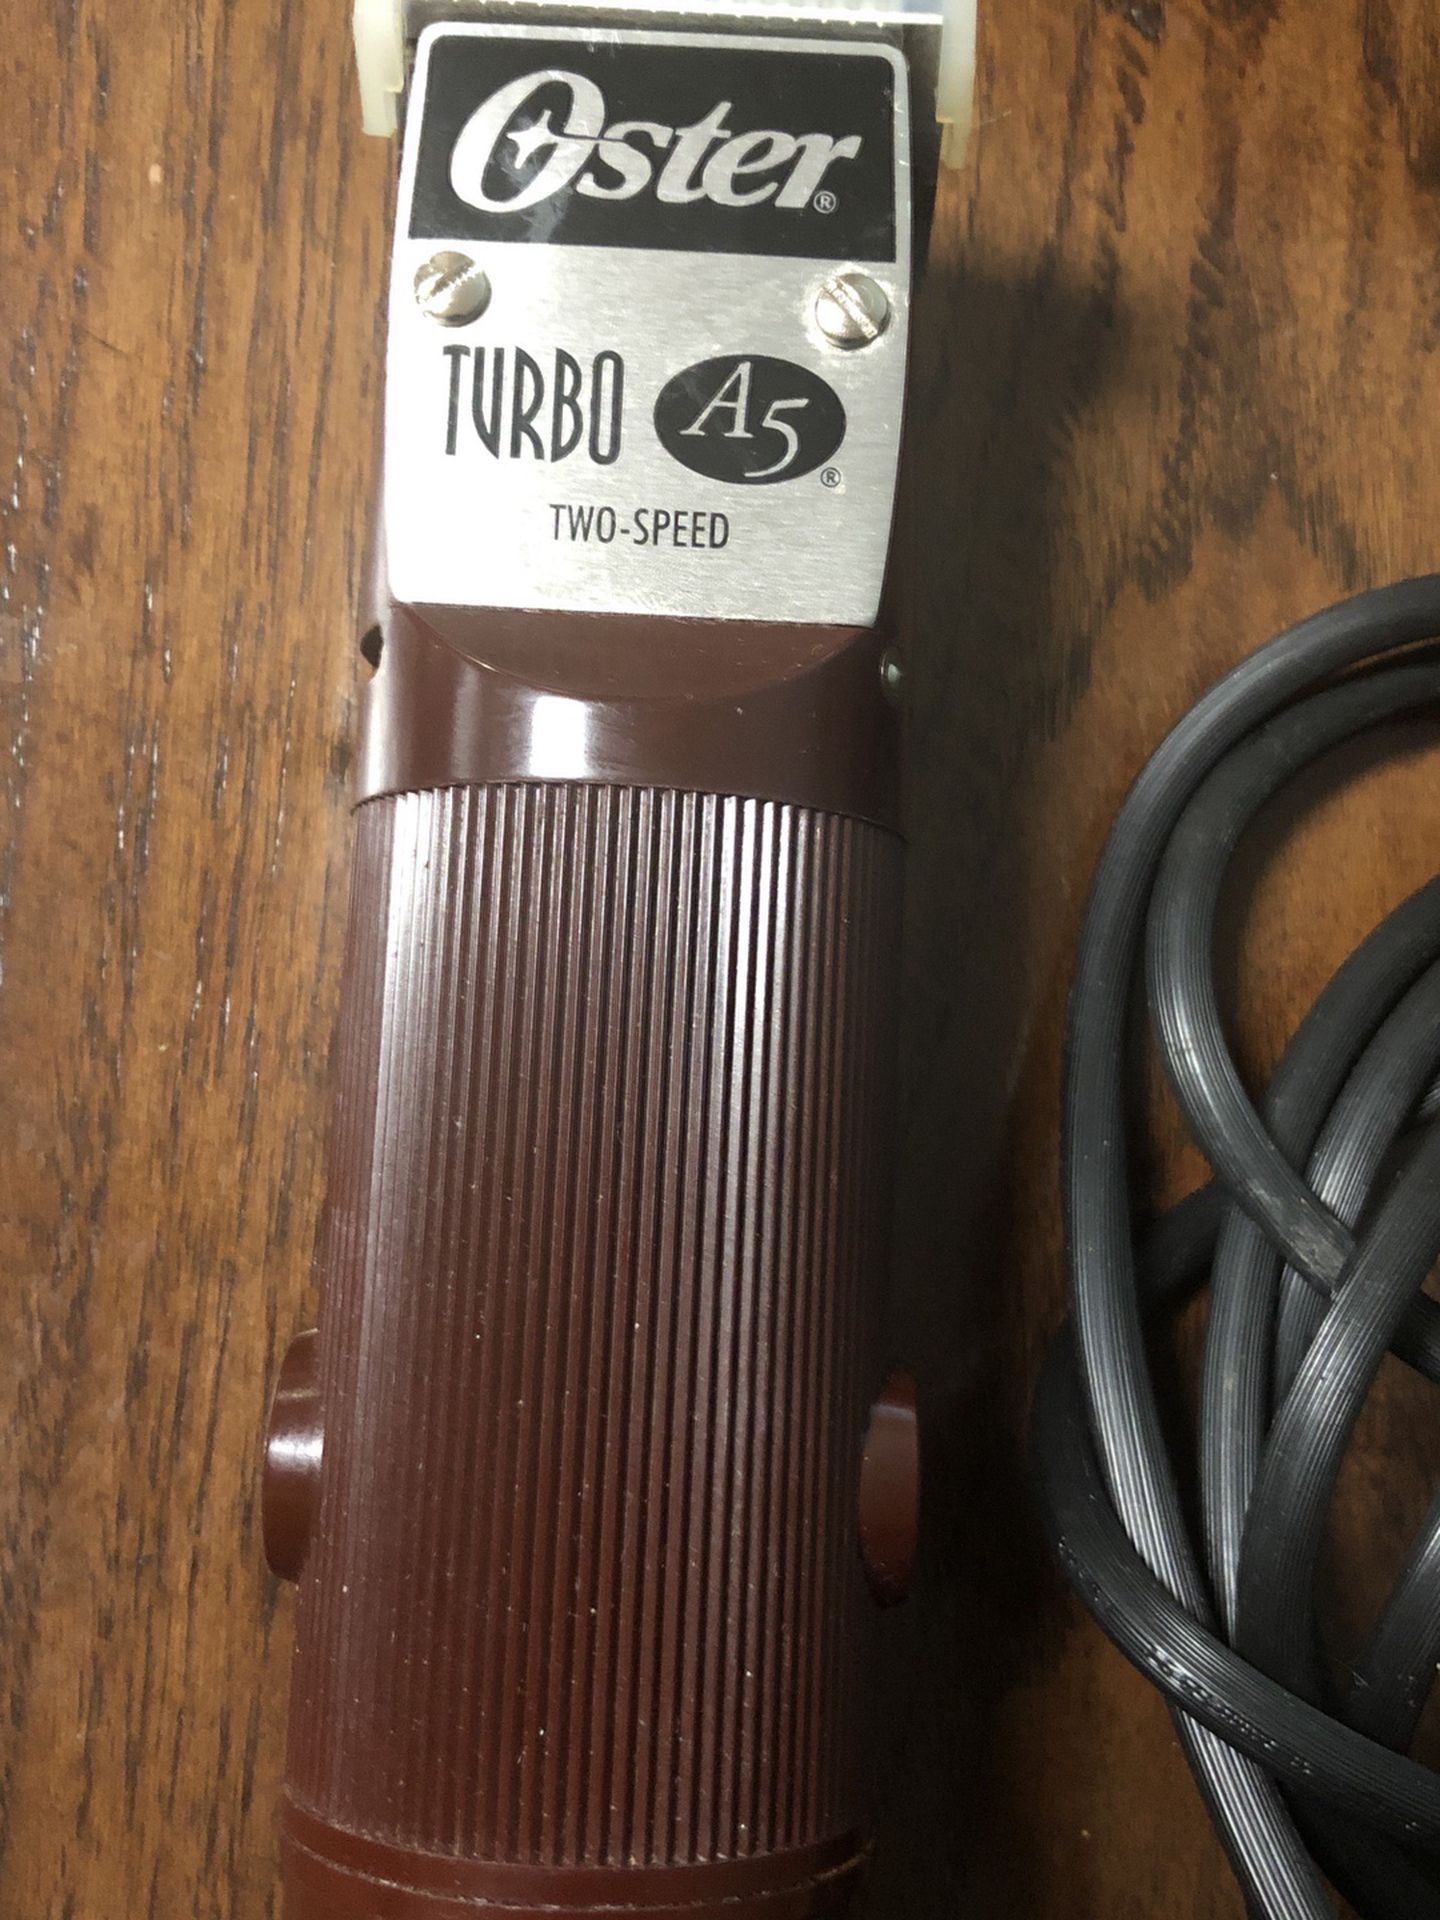 Oster A5 Turbo 2 Speed Horse Clippers